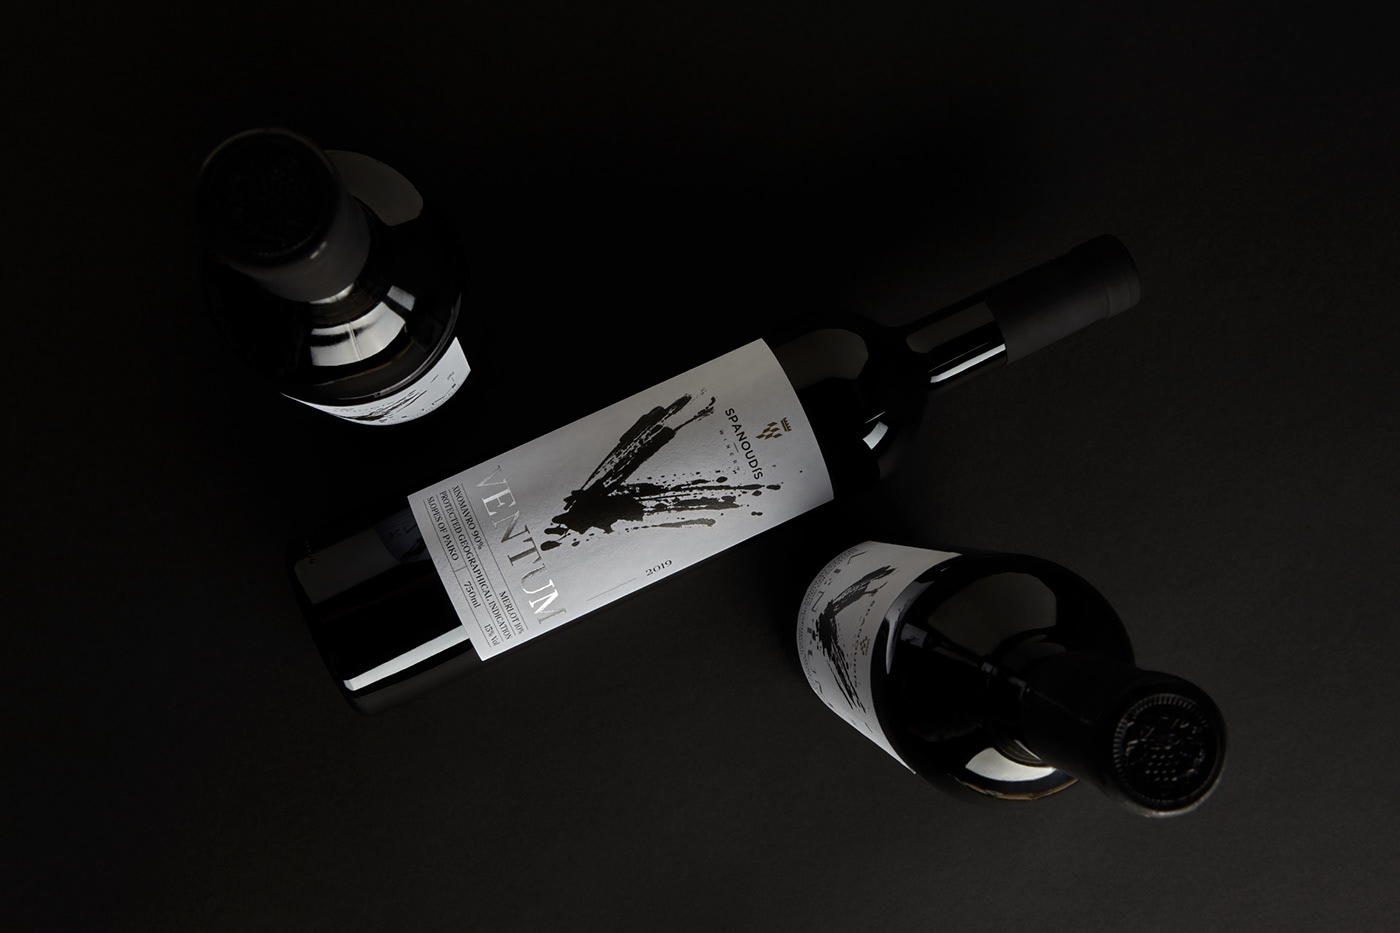 Spanoudis Winery branding and packaging design by Cursor Design